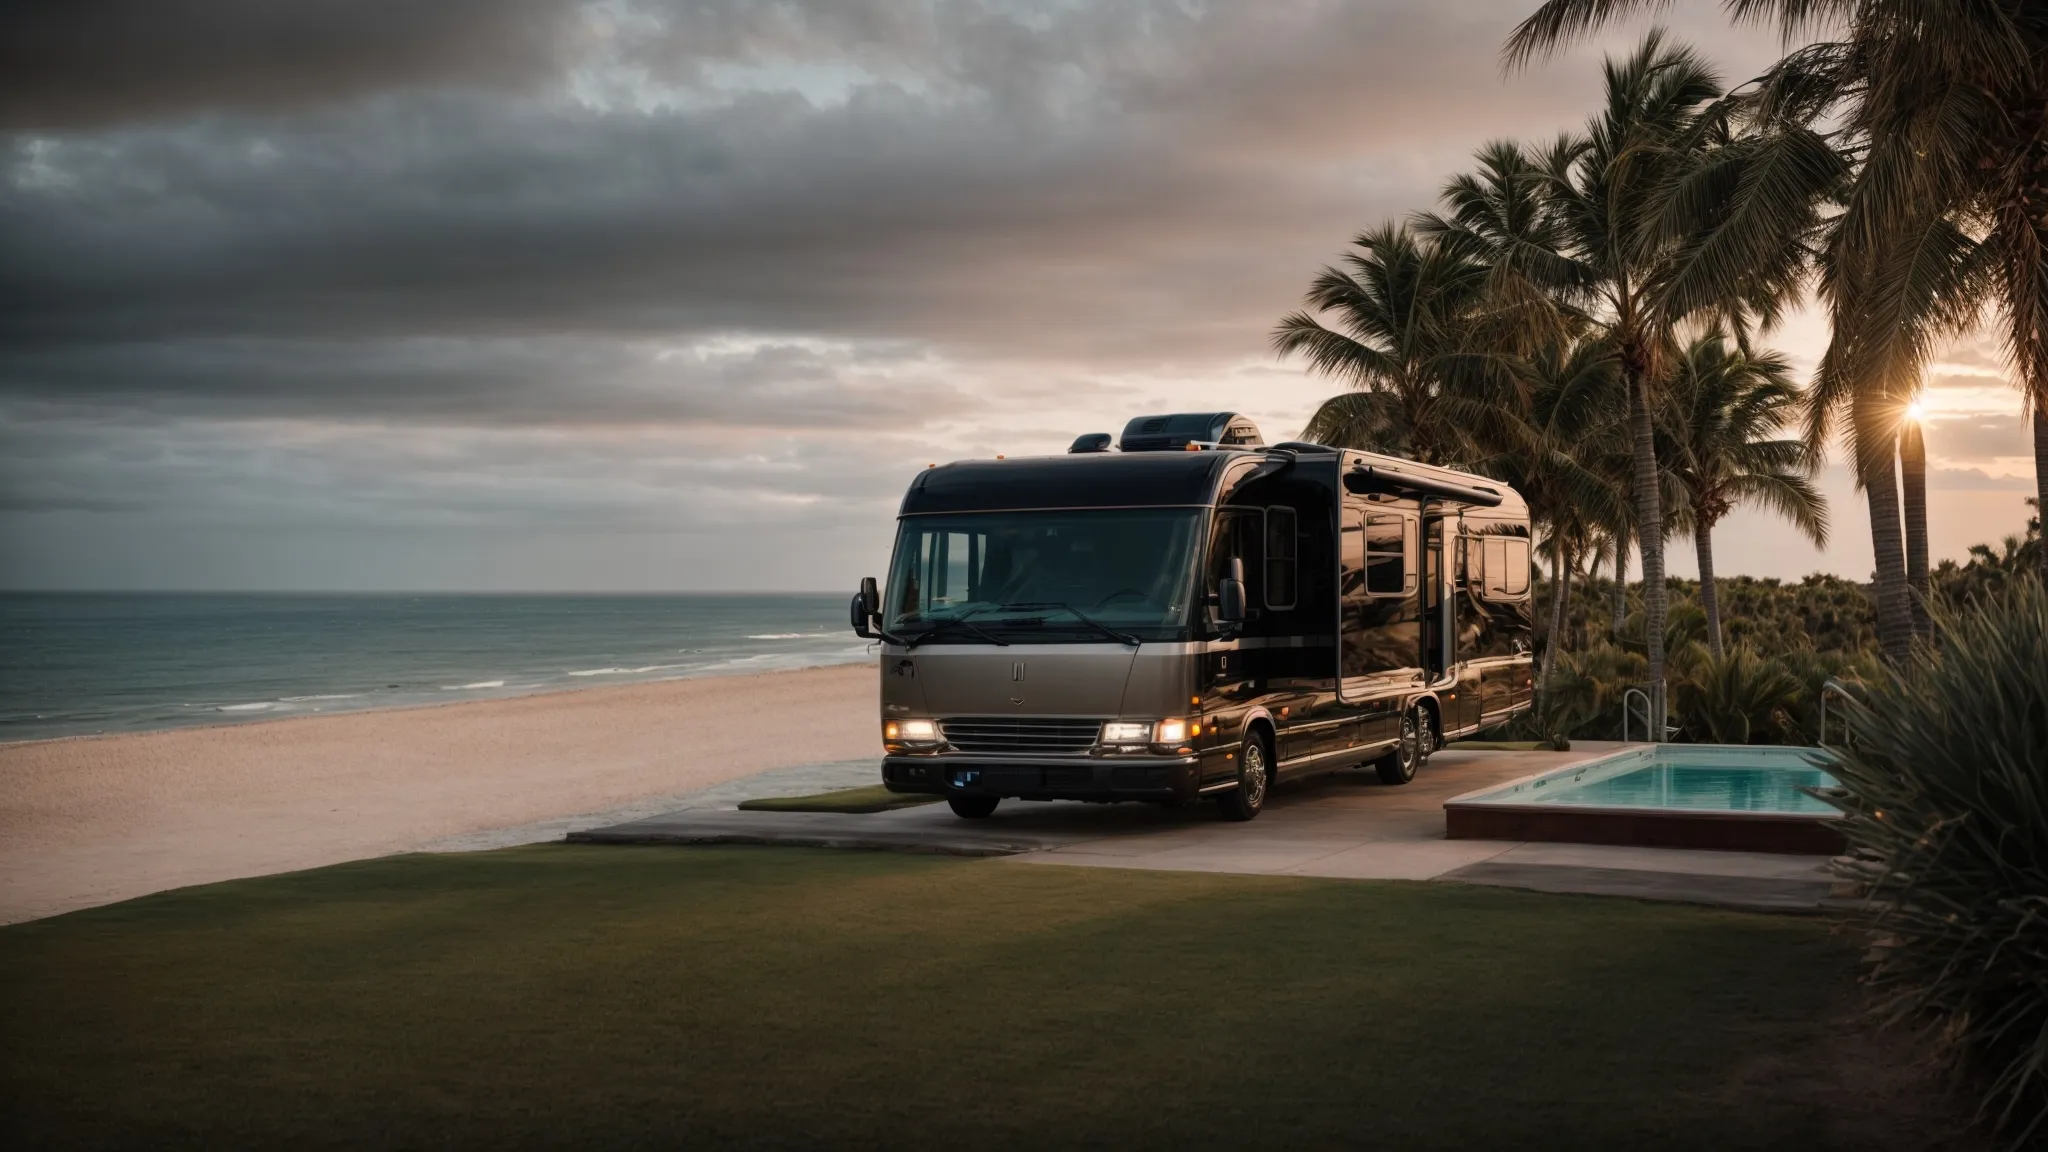 a modern rv overlooking a serene coastal landscape with lush palm trees and upscale outdoor facilities at sunset.